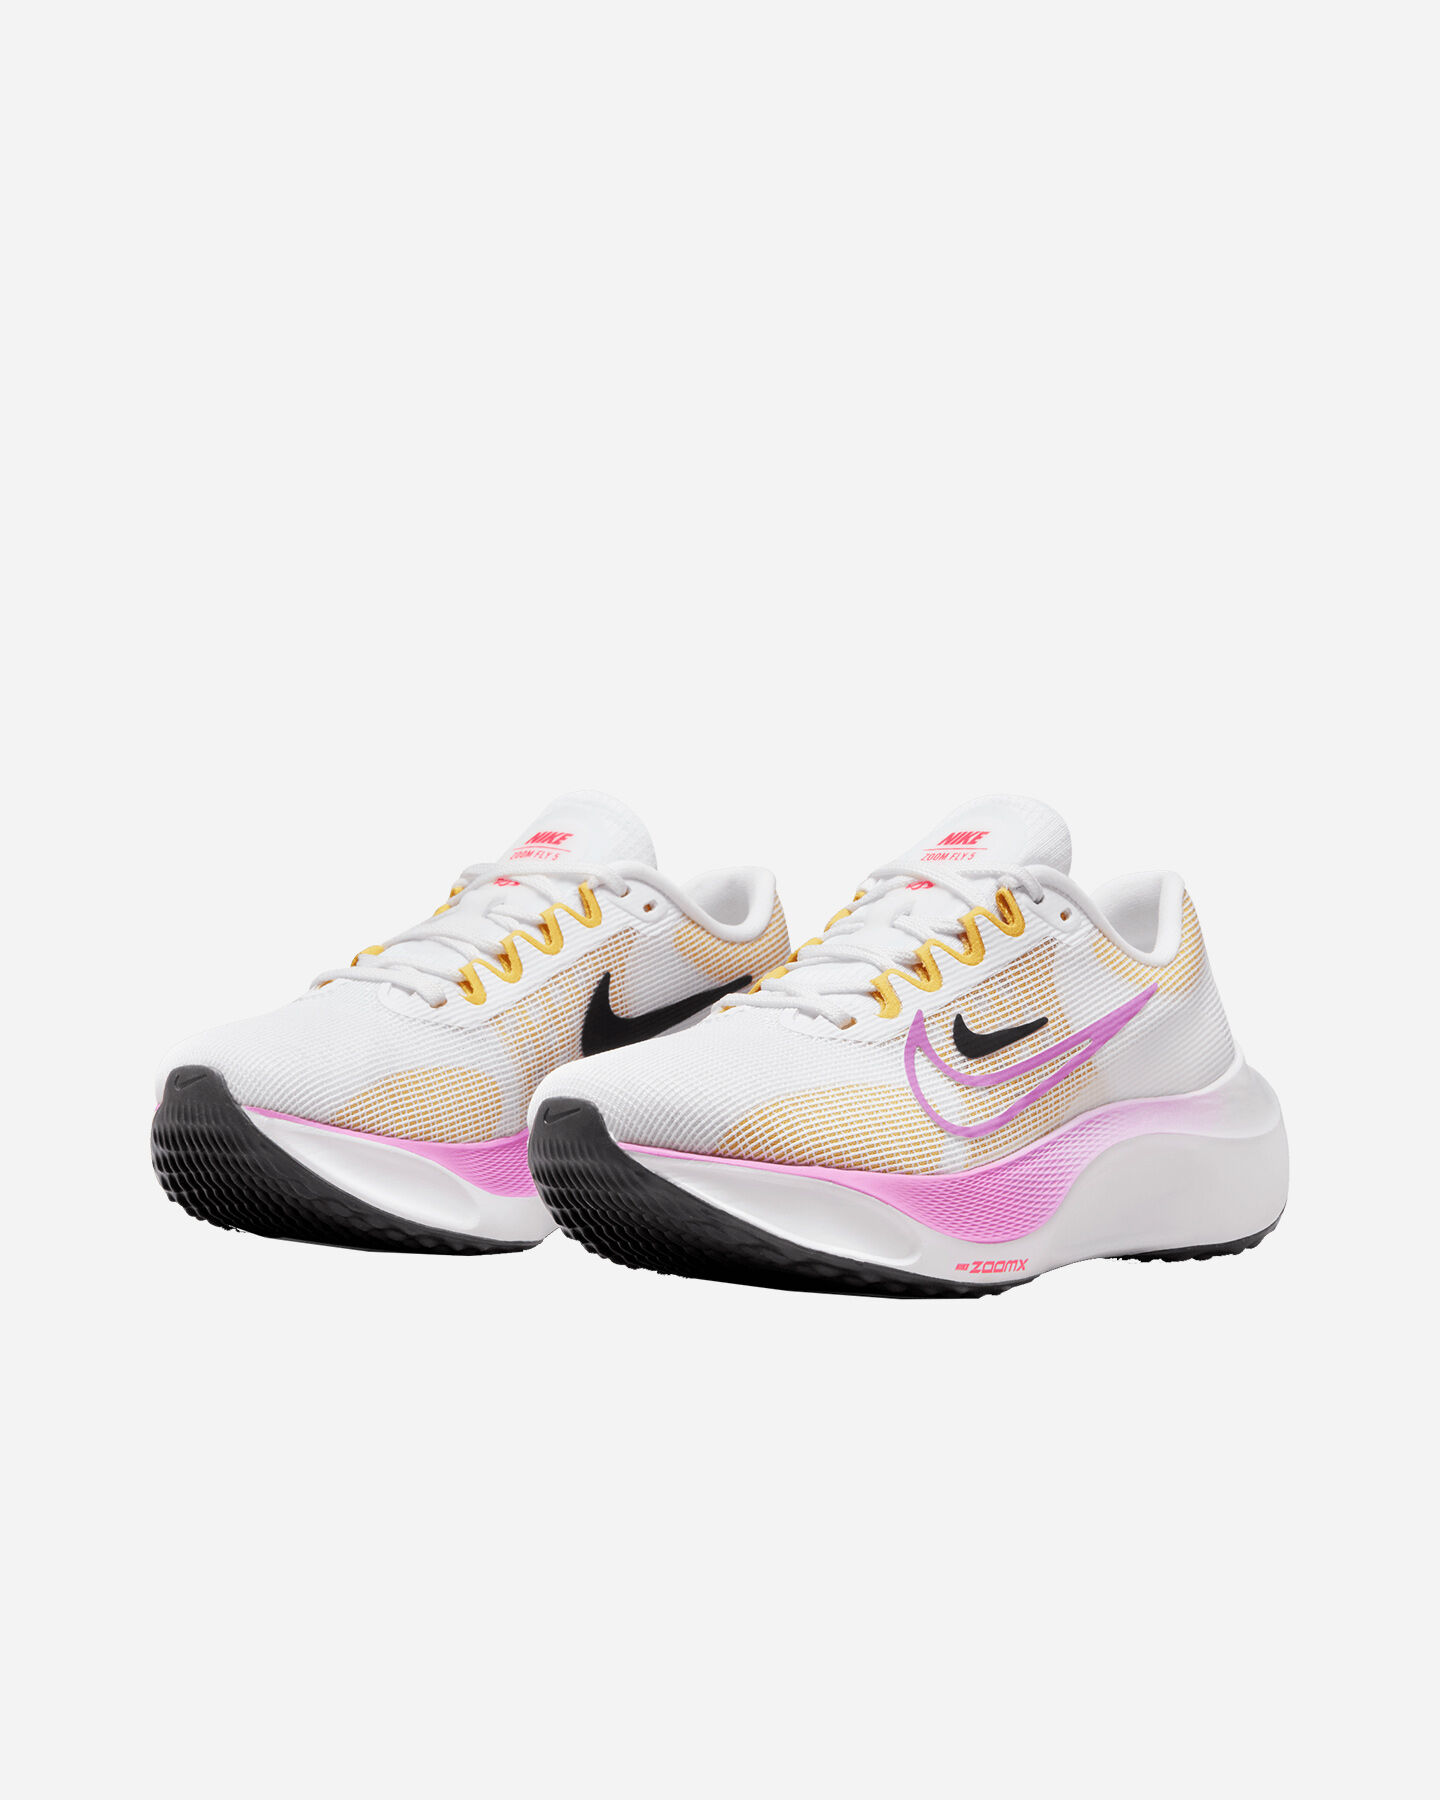  Scarpe running NIKE ZOOM FLY 5 W S5586173|100|6.5 scatto 1